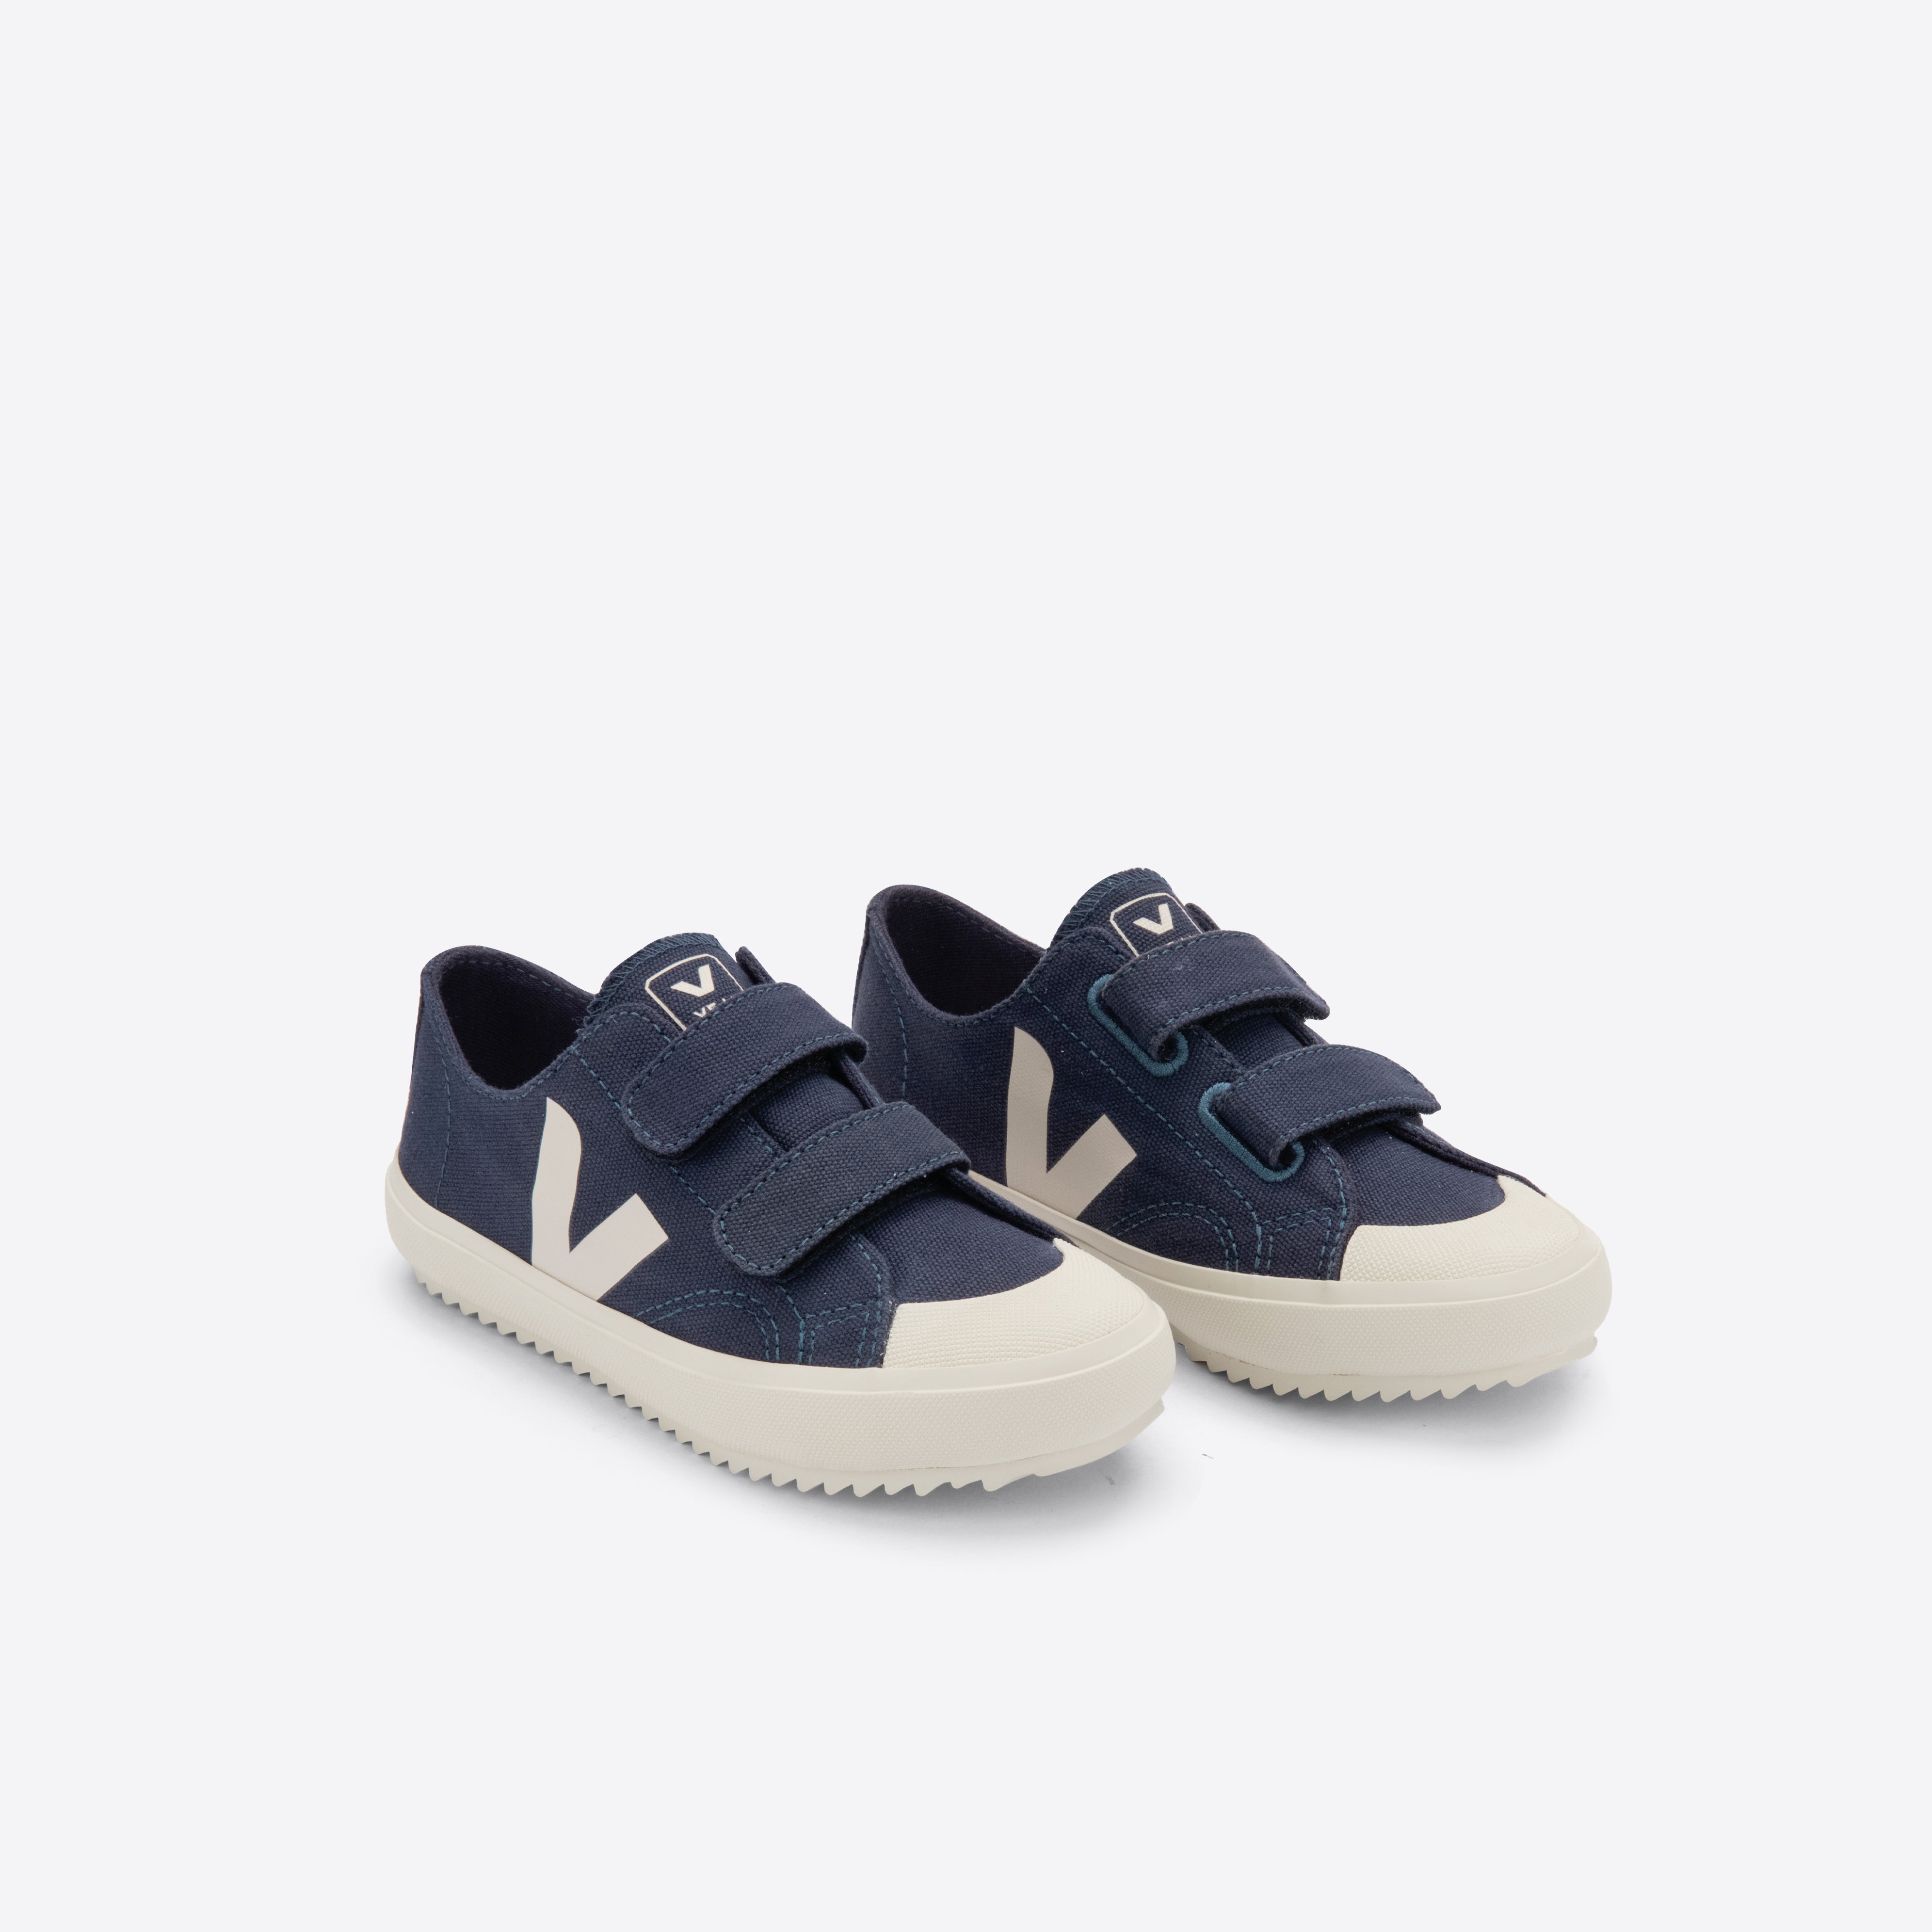 Boys & Girls Navy Canvas Shoes